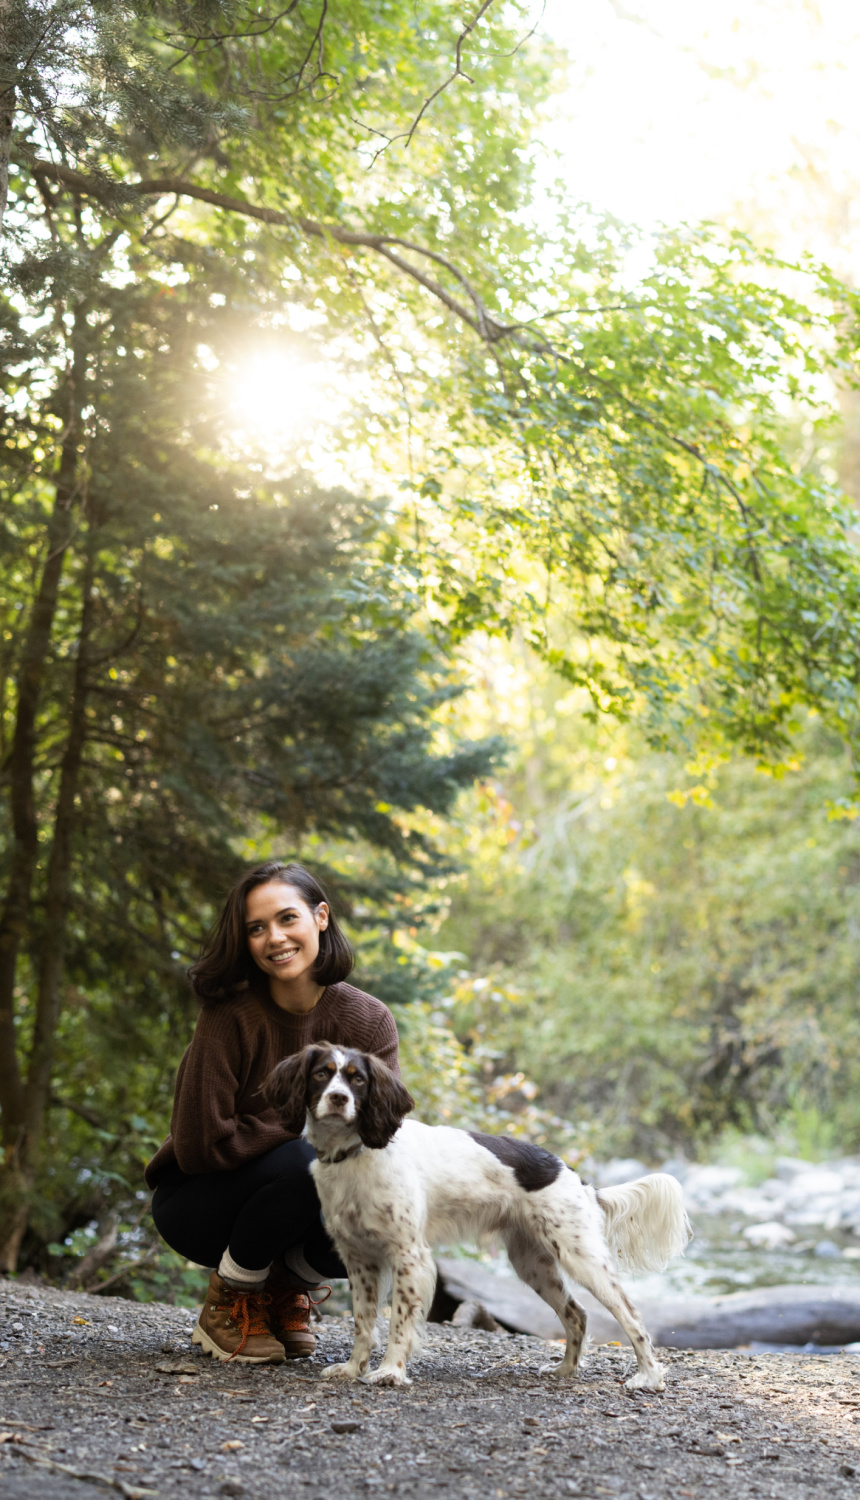 Woman kneeling with dog in woods